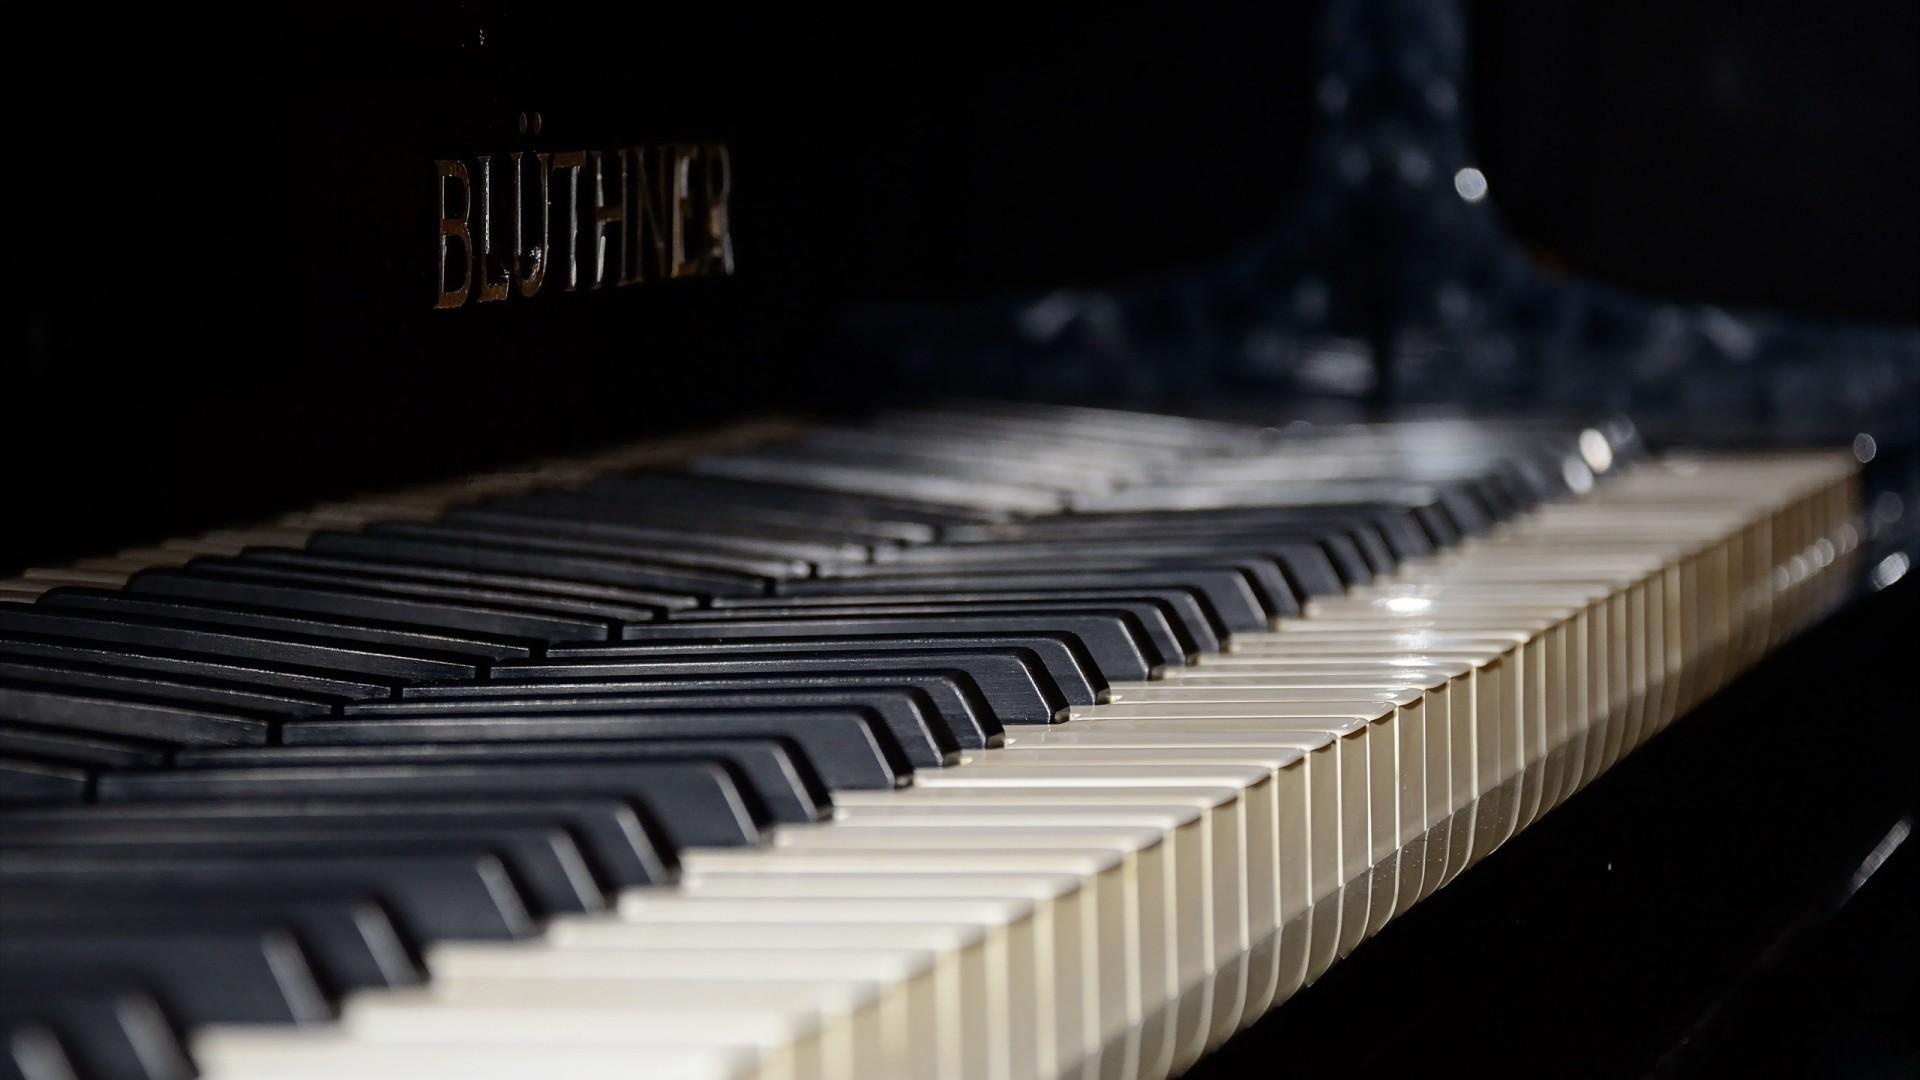 Grand Piano: Bluthner, Musical instrument with metal strings, which are strung under great tension on a heavy metal frame. 1920x1080 Full HD Background.